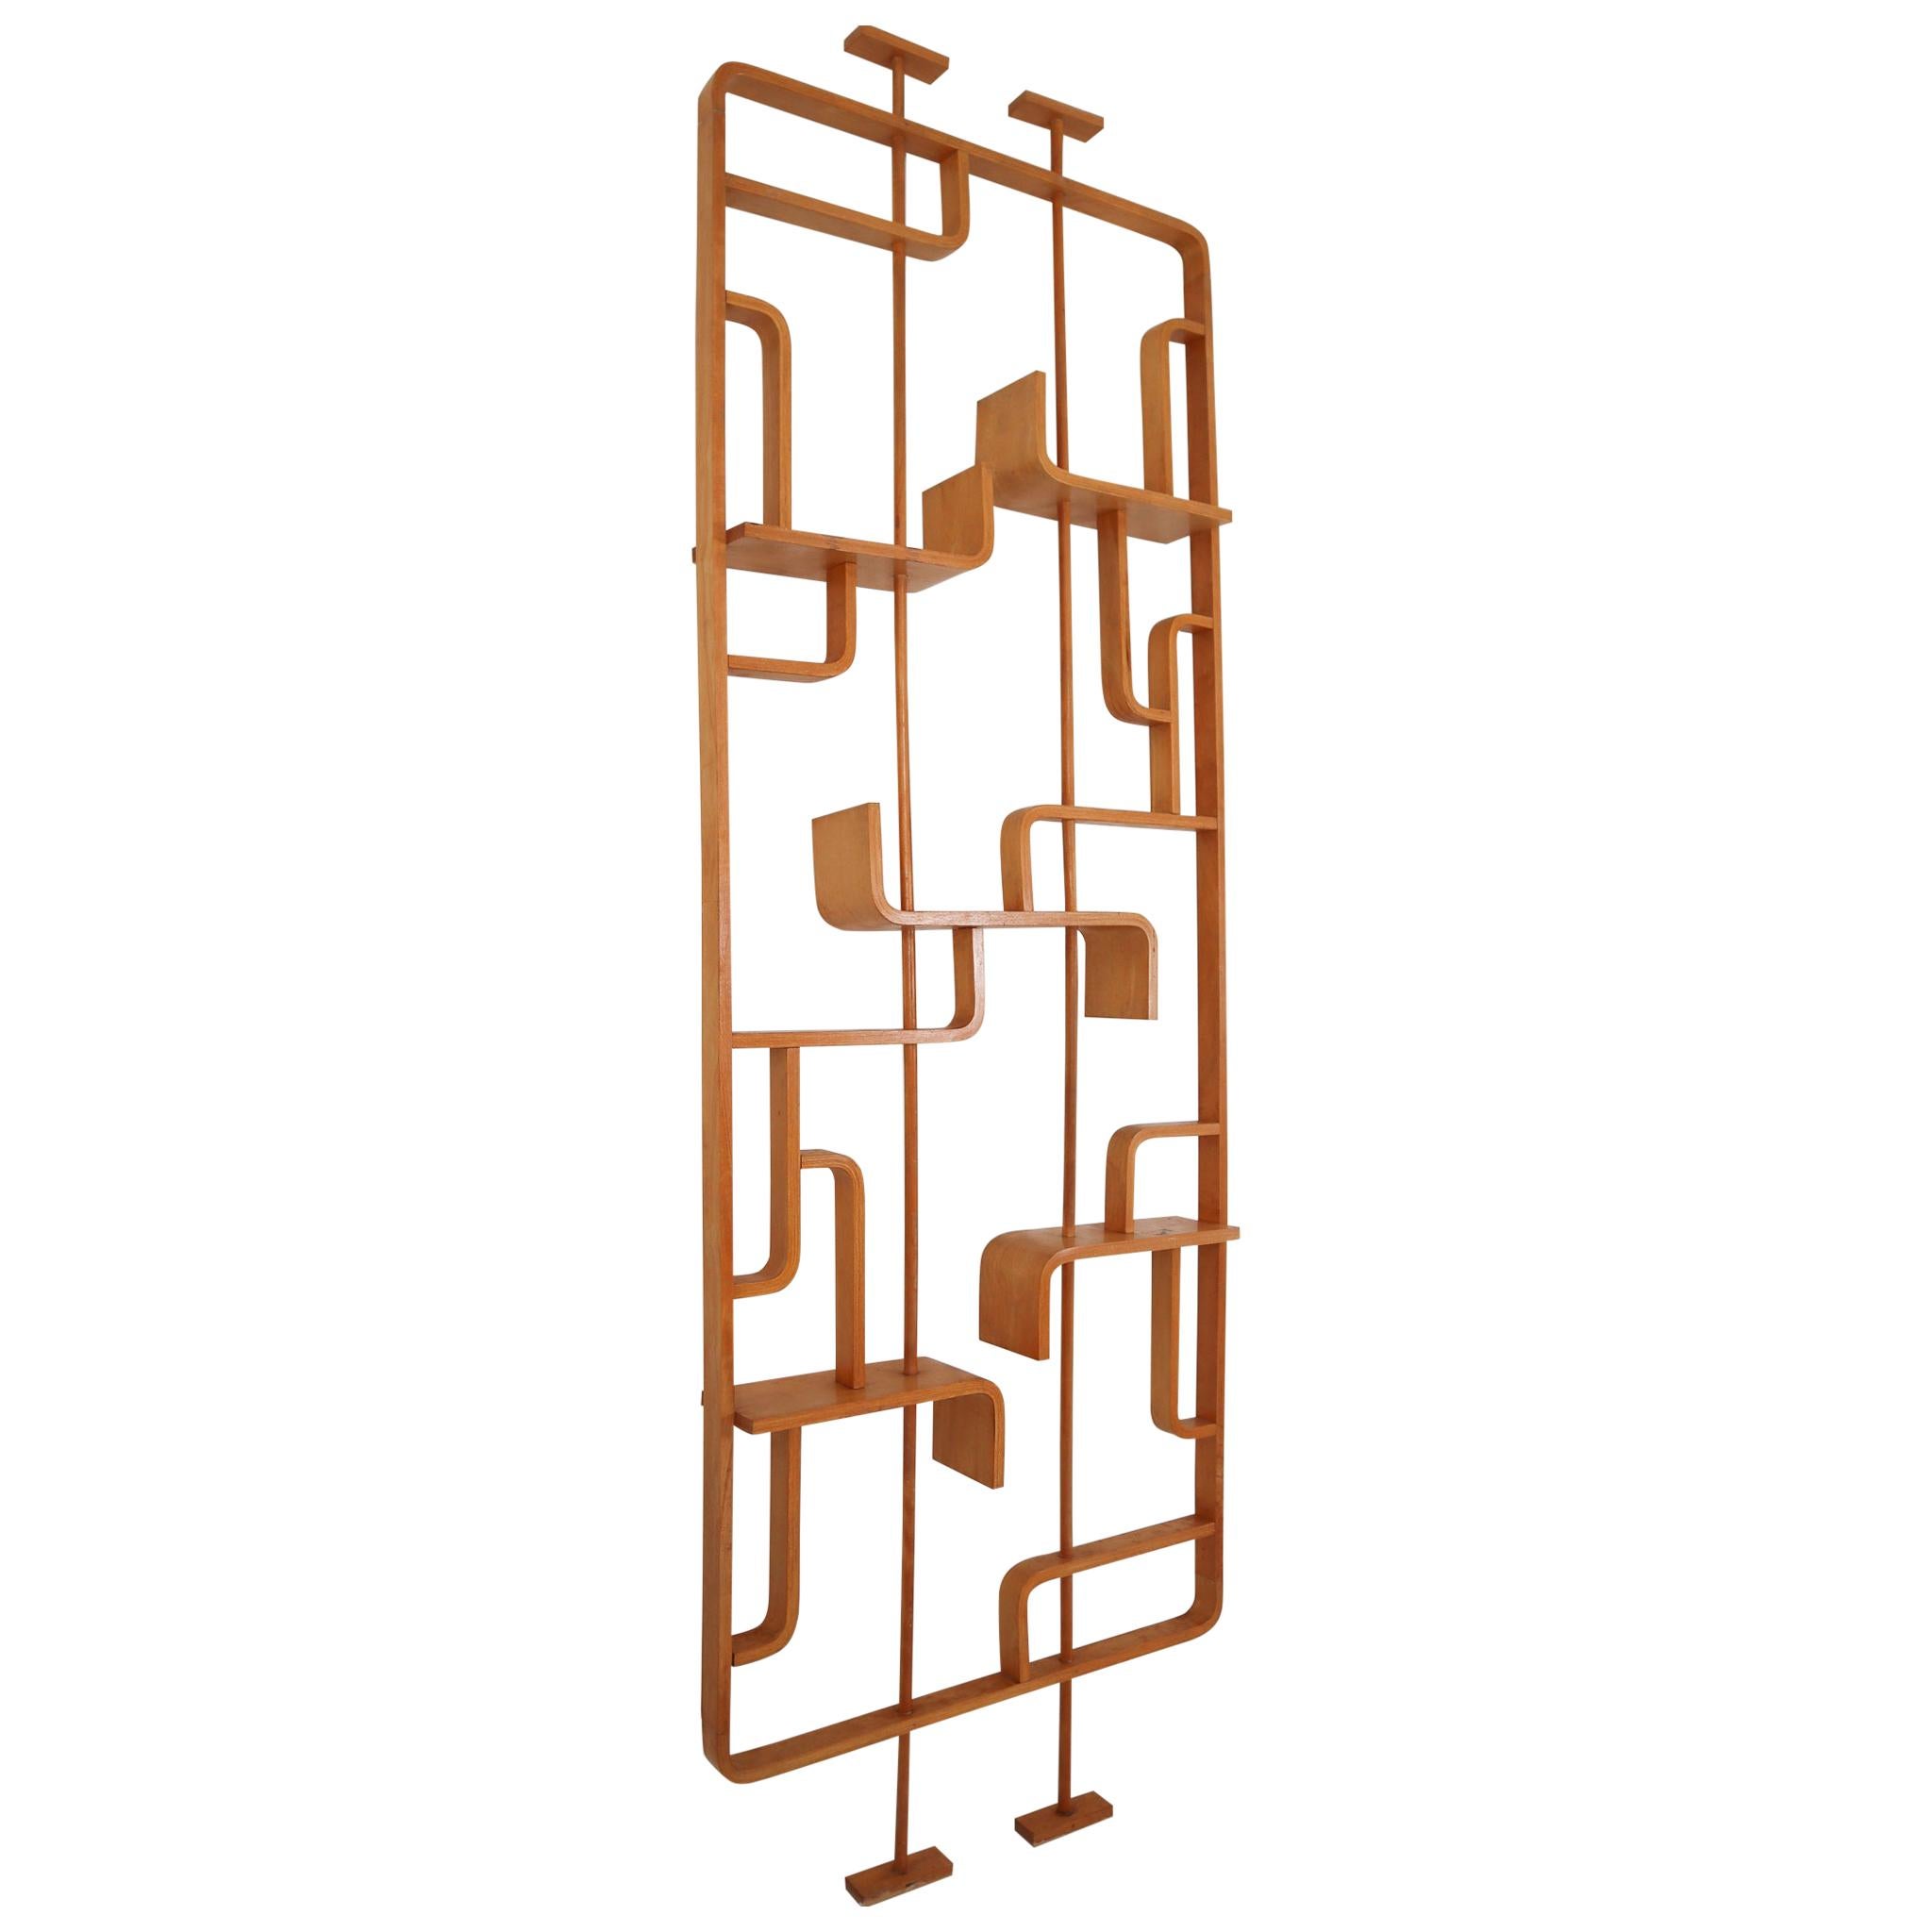 Tall Midcentury Room Divider in Blond Bentwood, circa 1960s